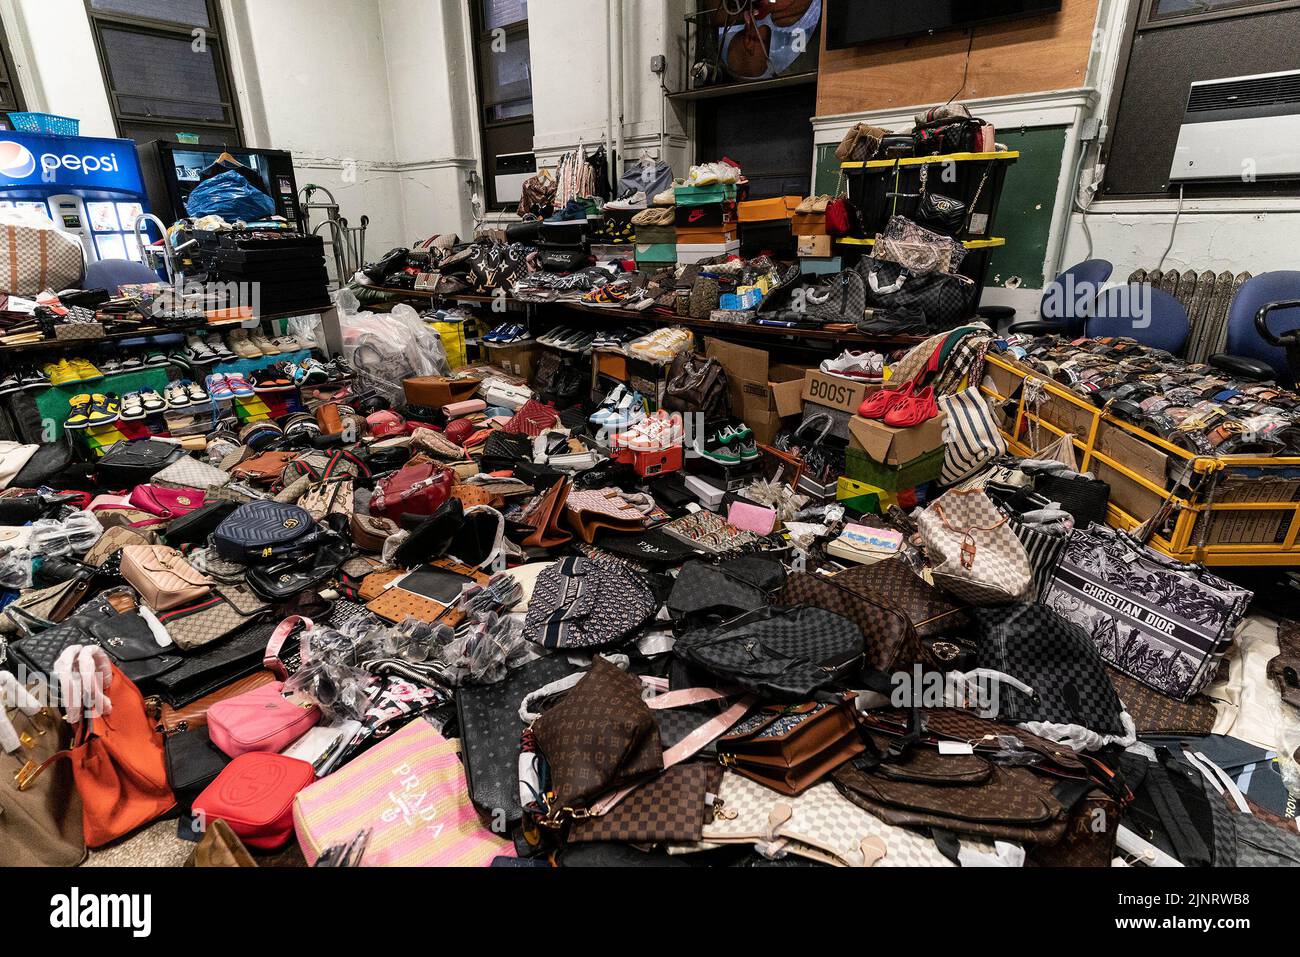 NYPD pulls off massive counterfeit goods bust on Canal Street 